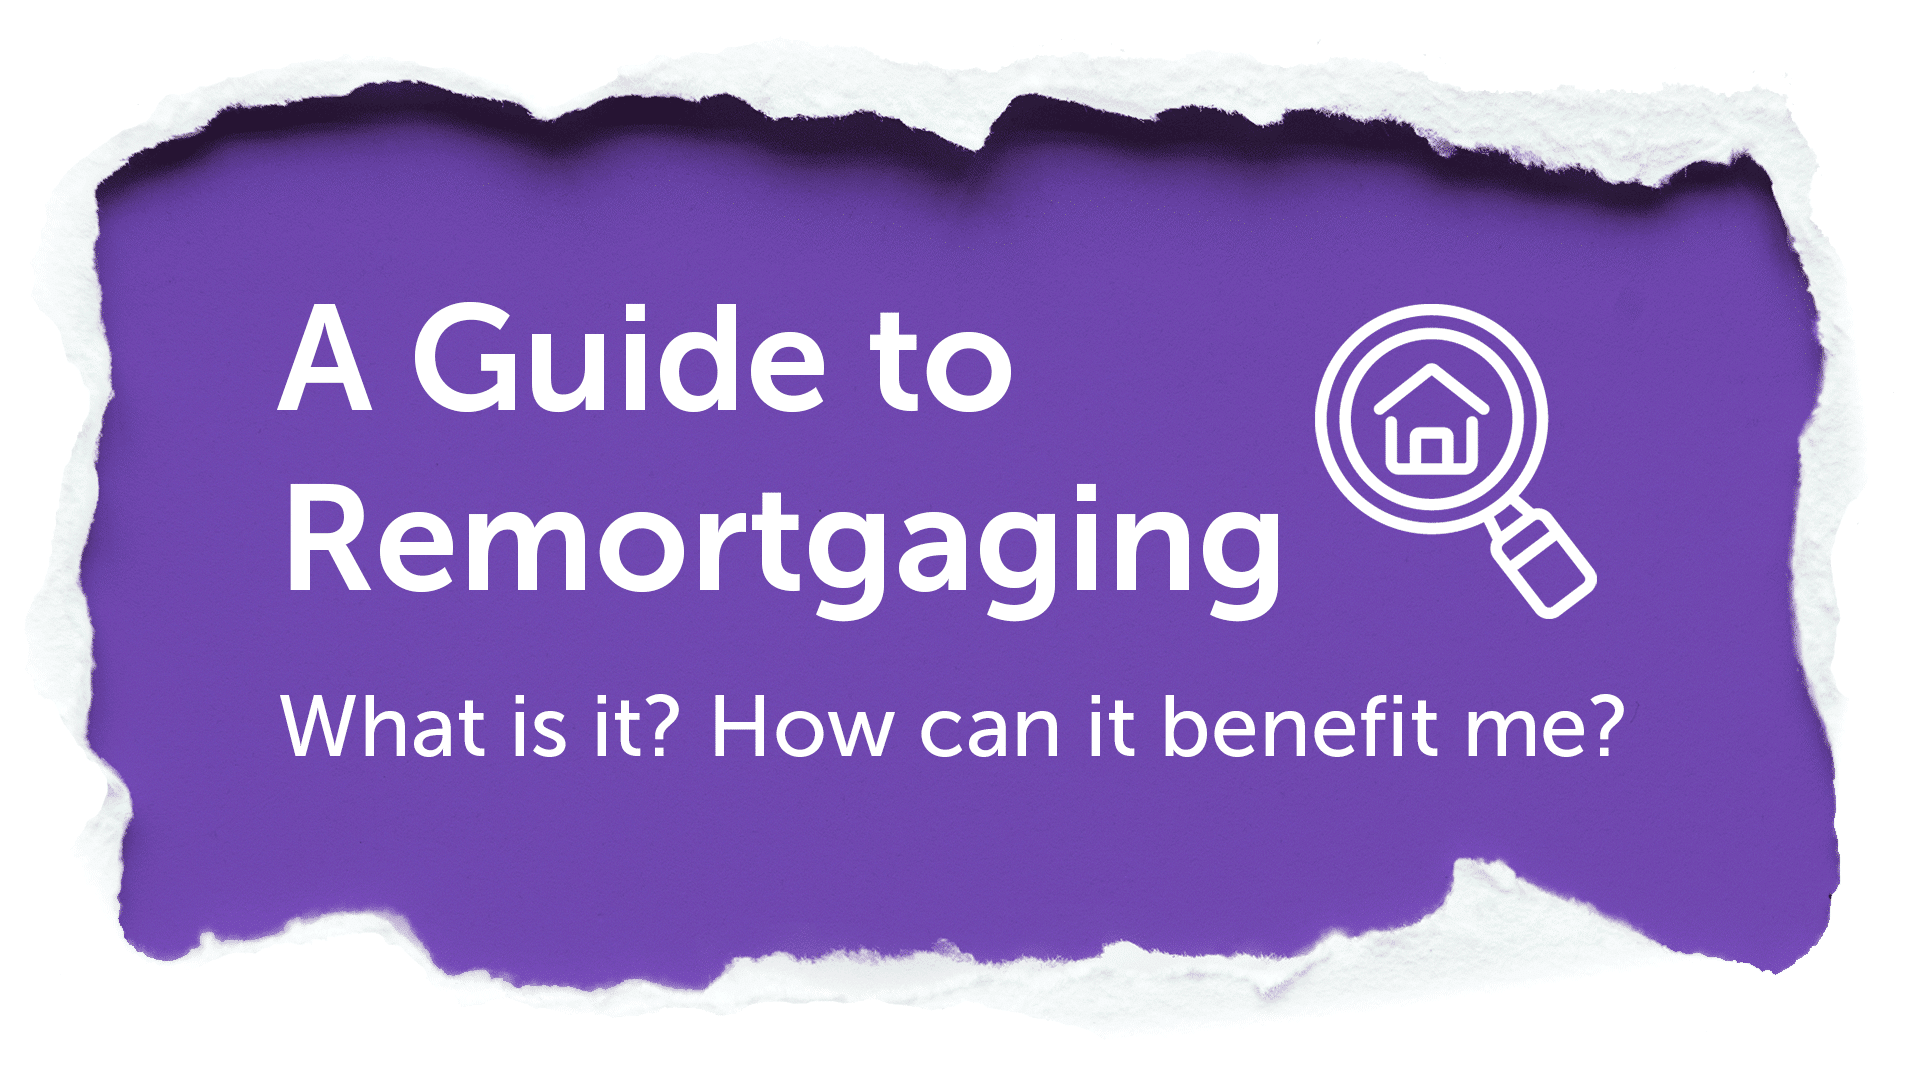 A Guide to Remortgaging in Doncaster